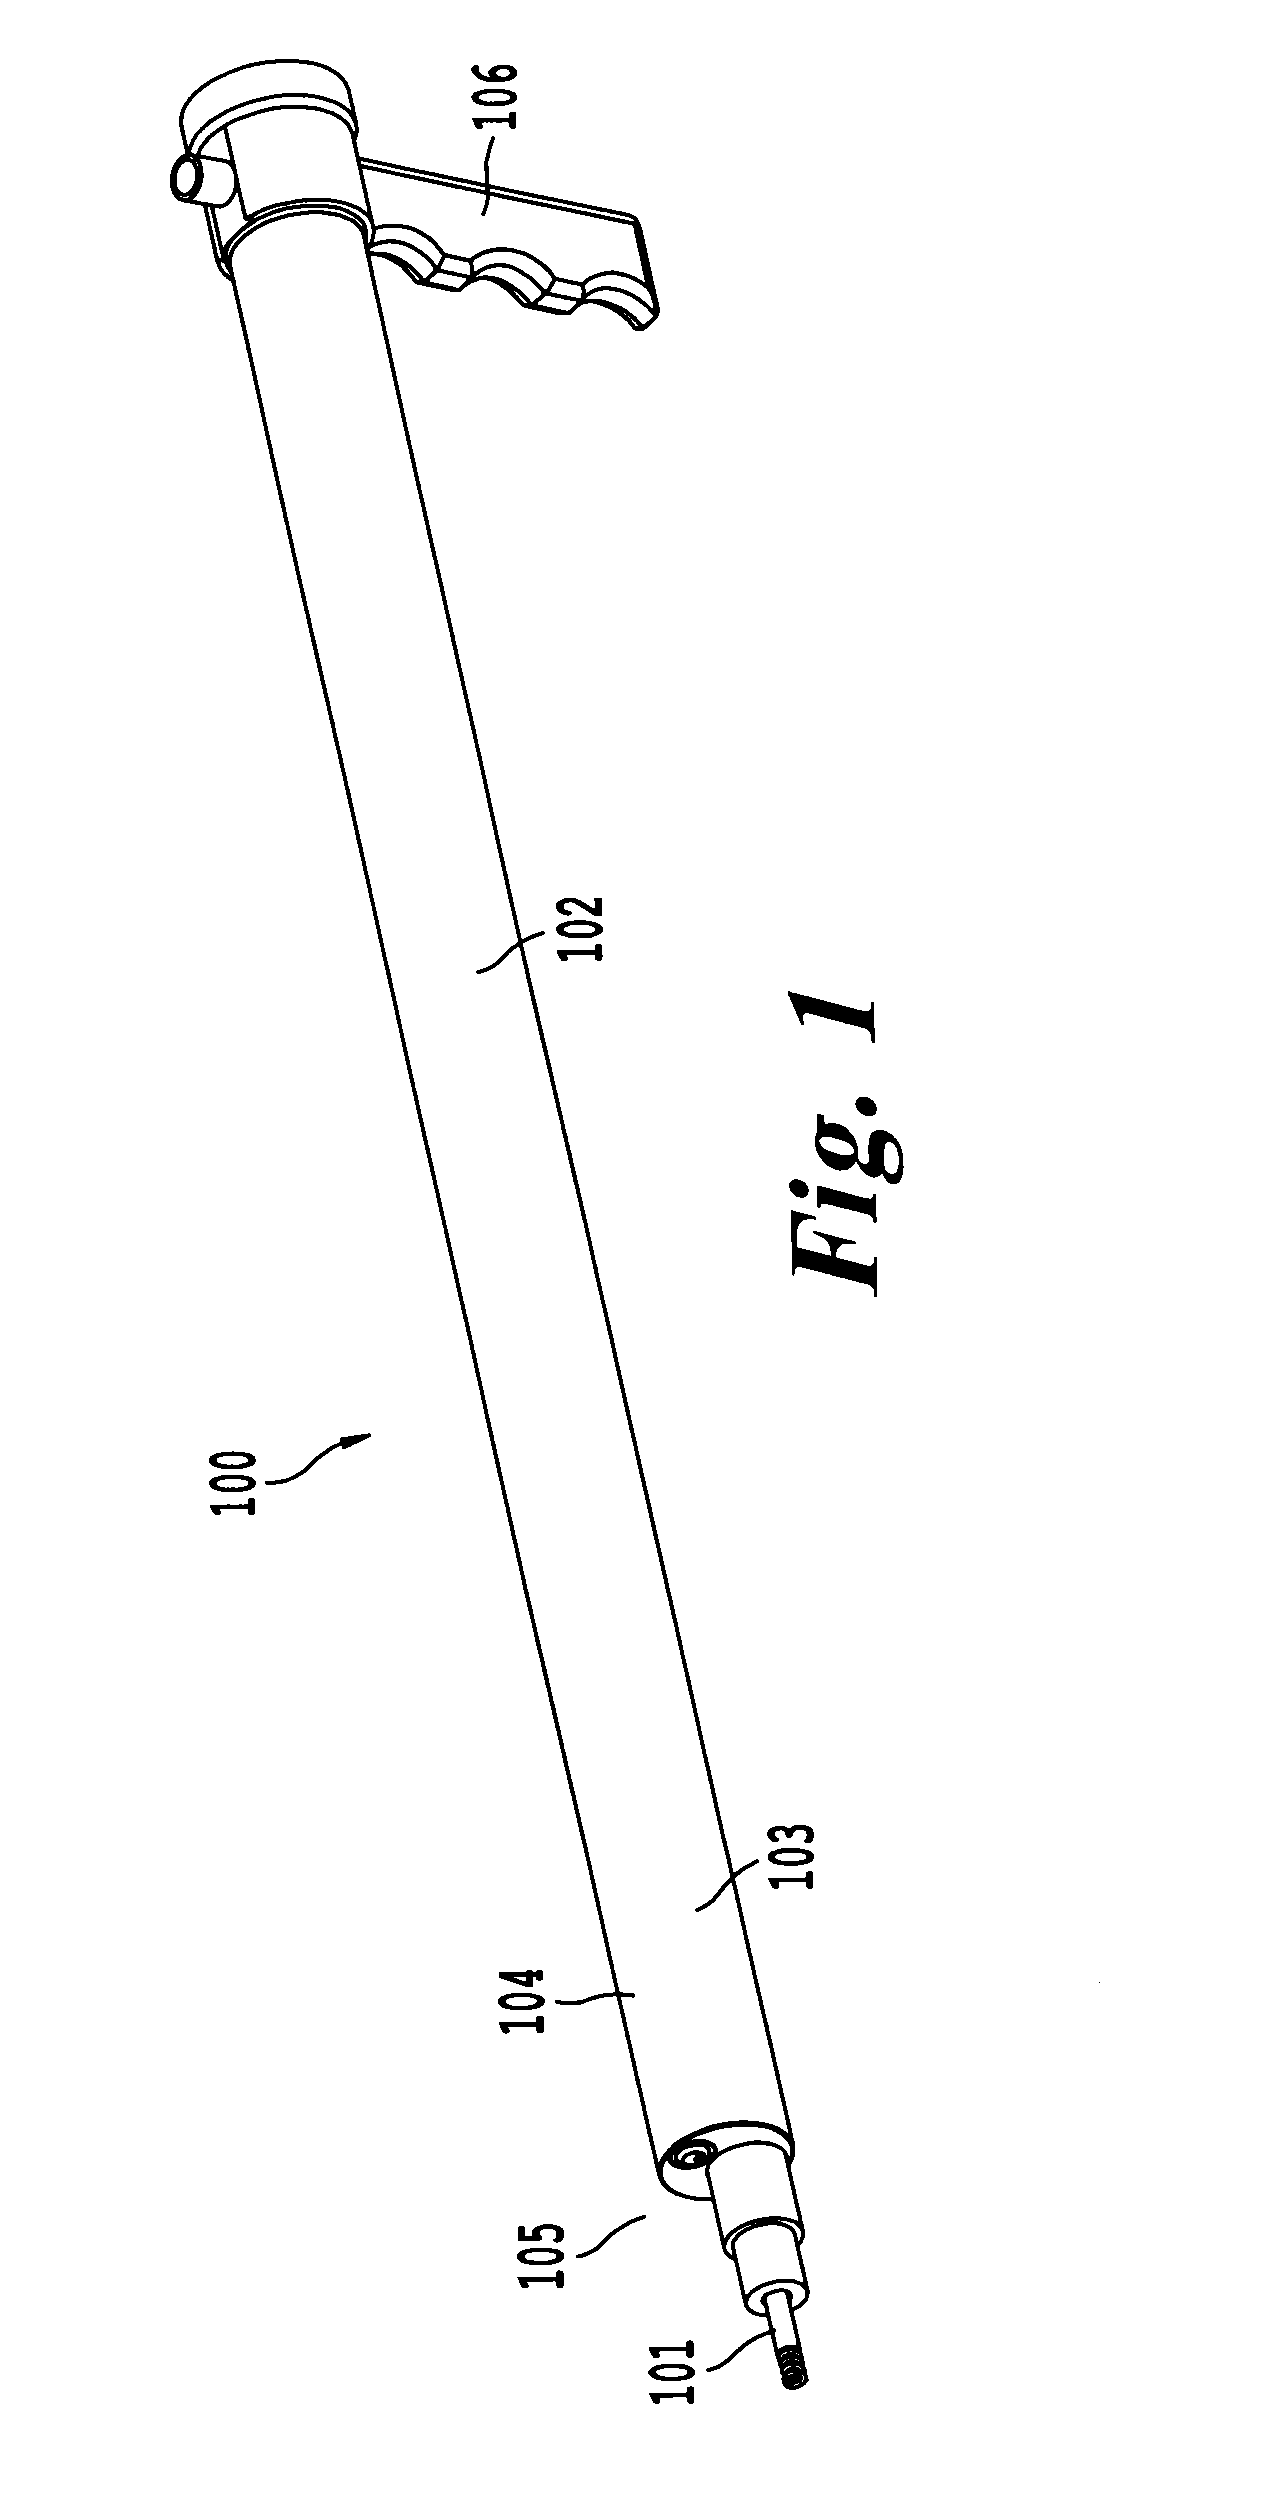 Delivery tool and method for devices in the pericardial space